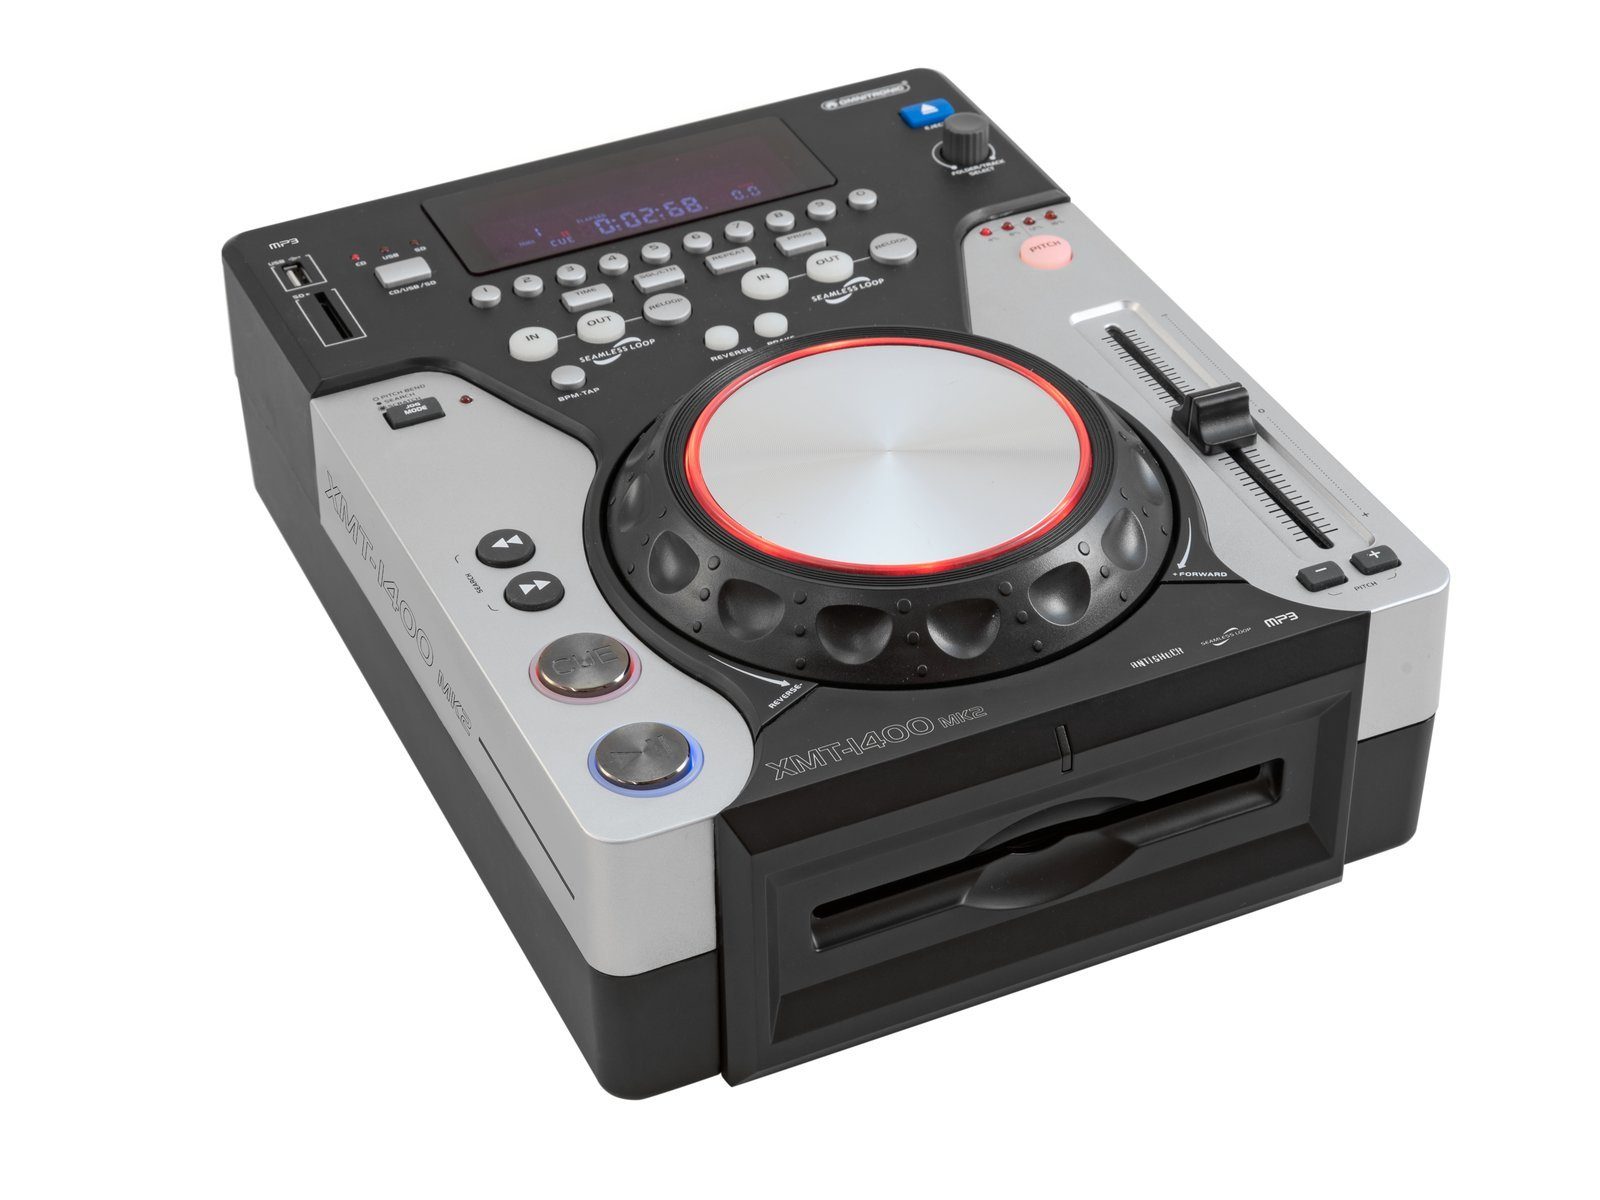 Stereo-CD Omnitronic MK2 Player XMT-1400 Tabletop-CD-Player